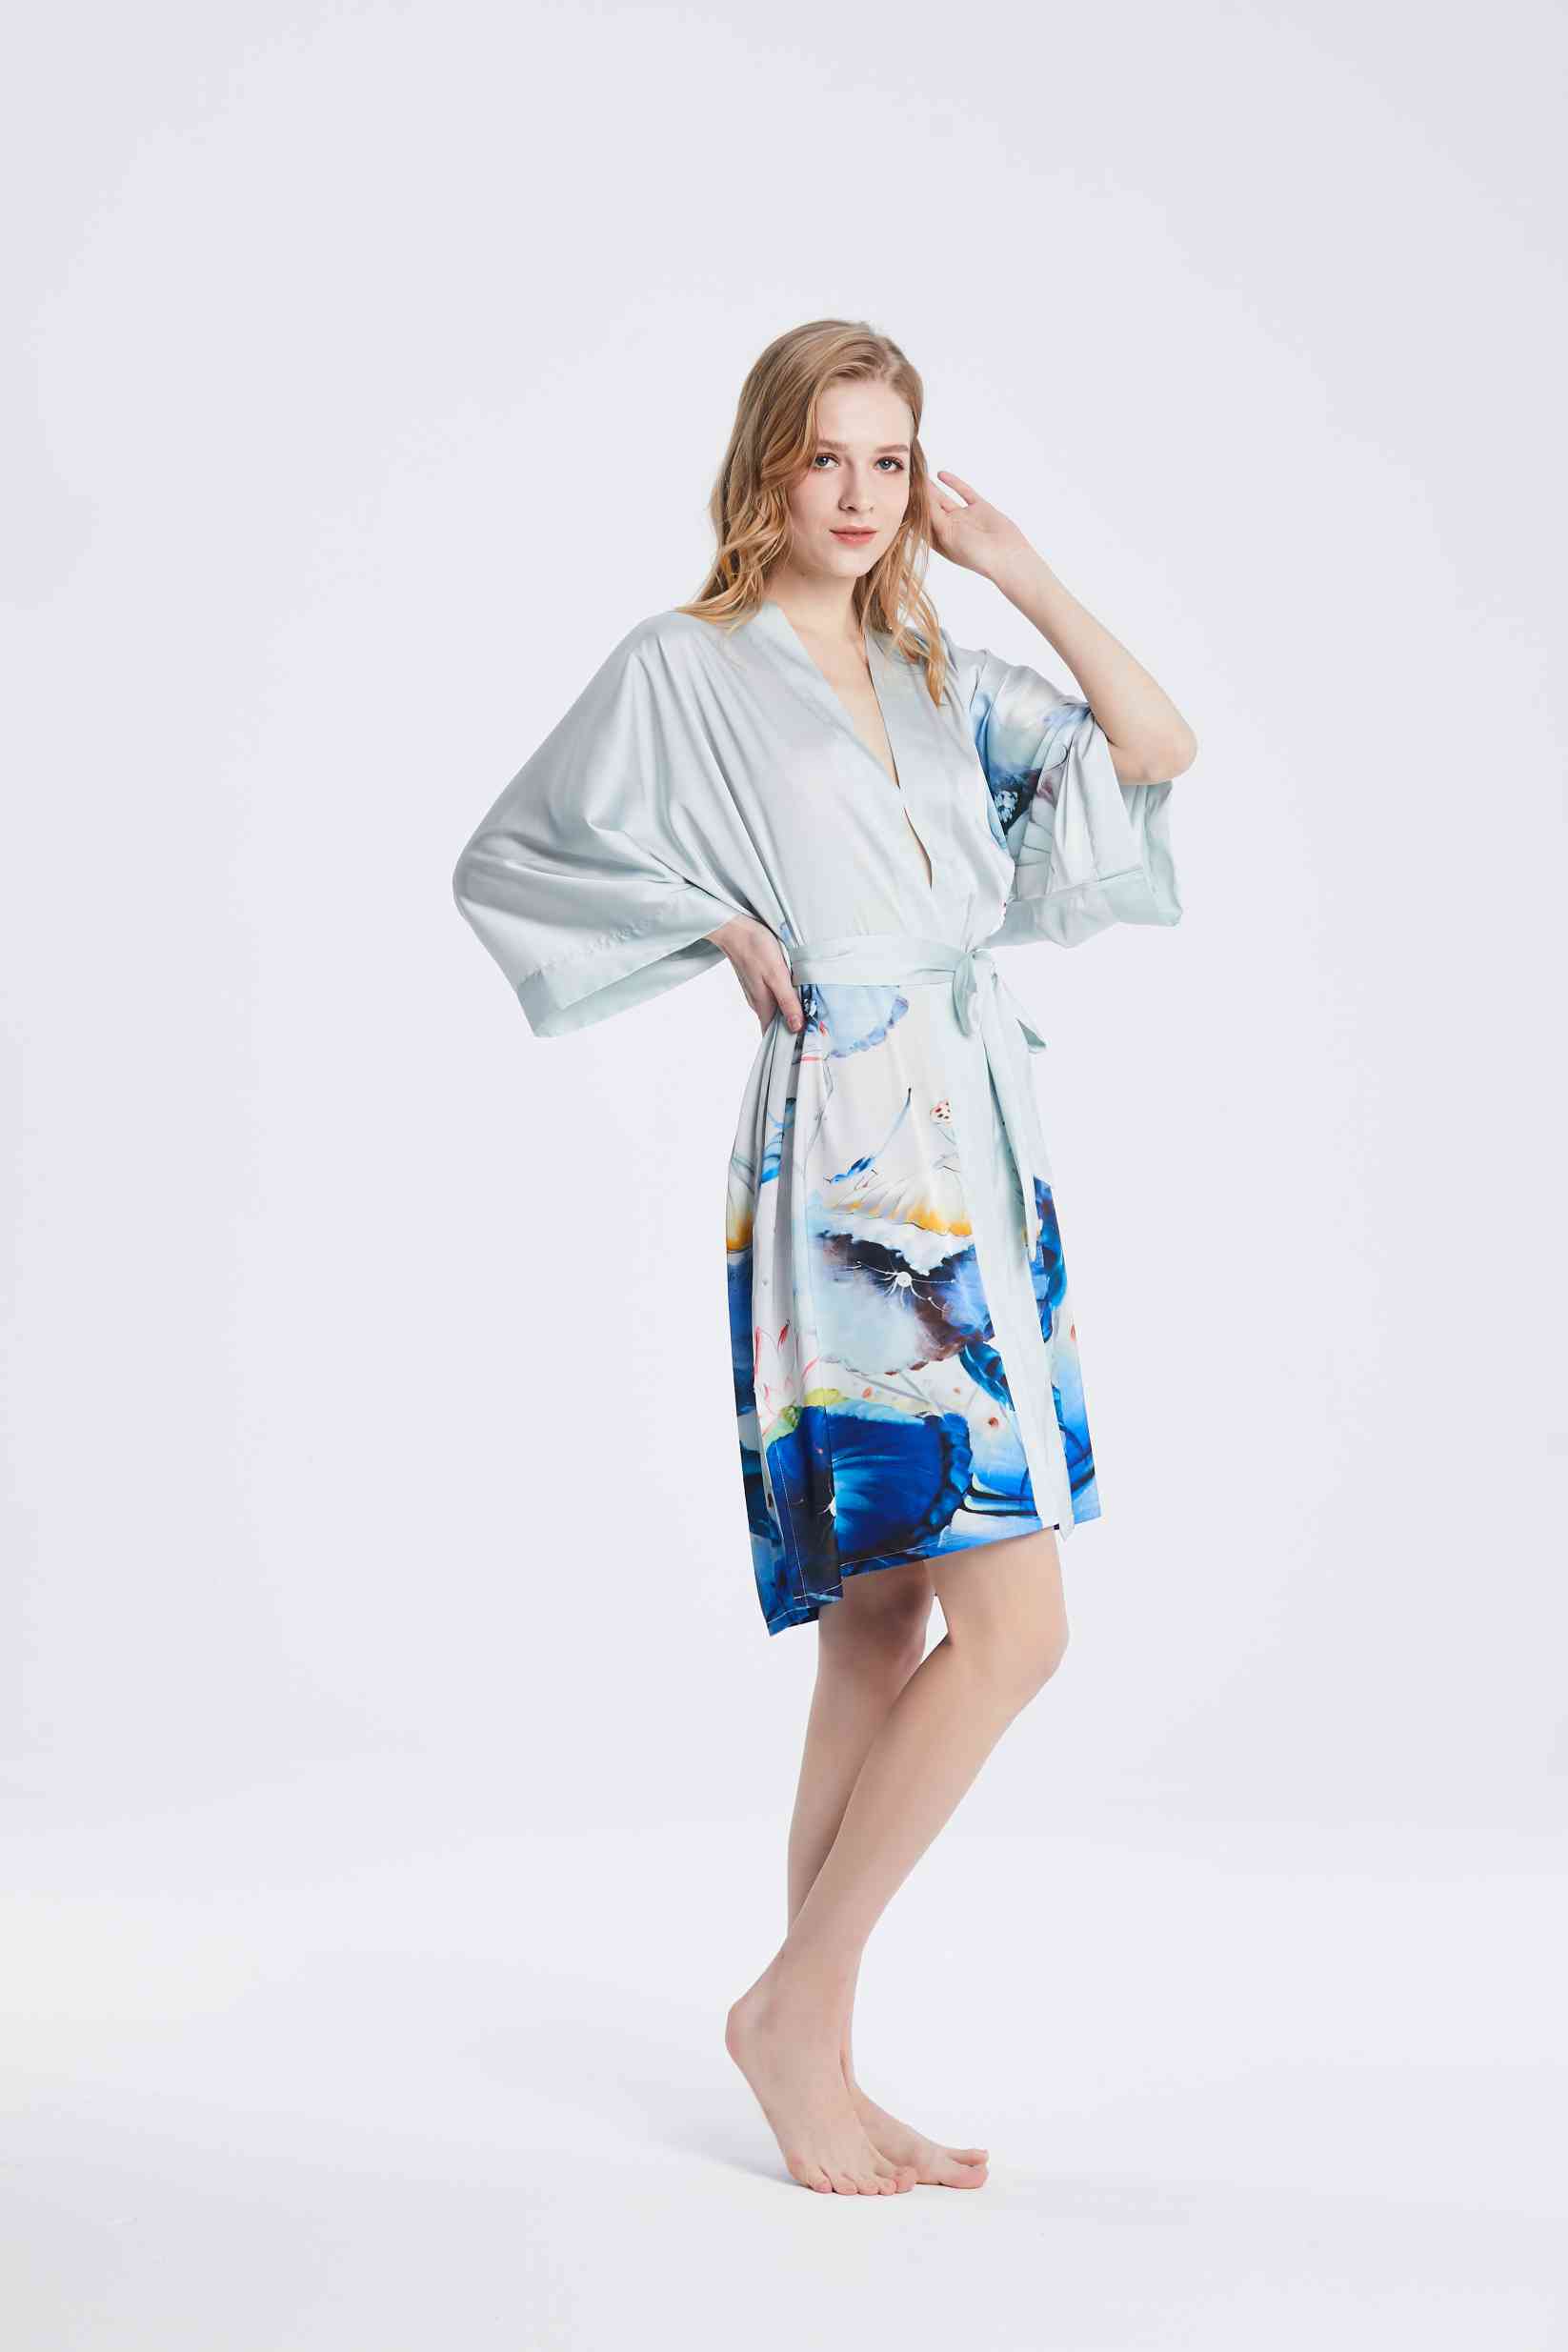 Best Ladies Short Washable Silk Sky Blue Kimono Nightwear Robe Nightgown with Floral Print Factory Wholesale